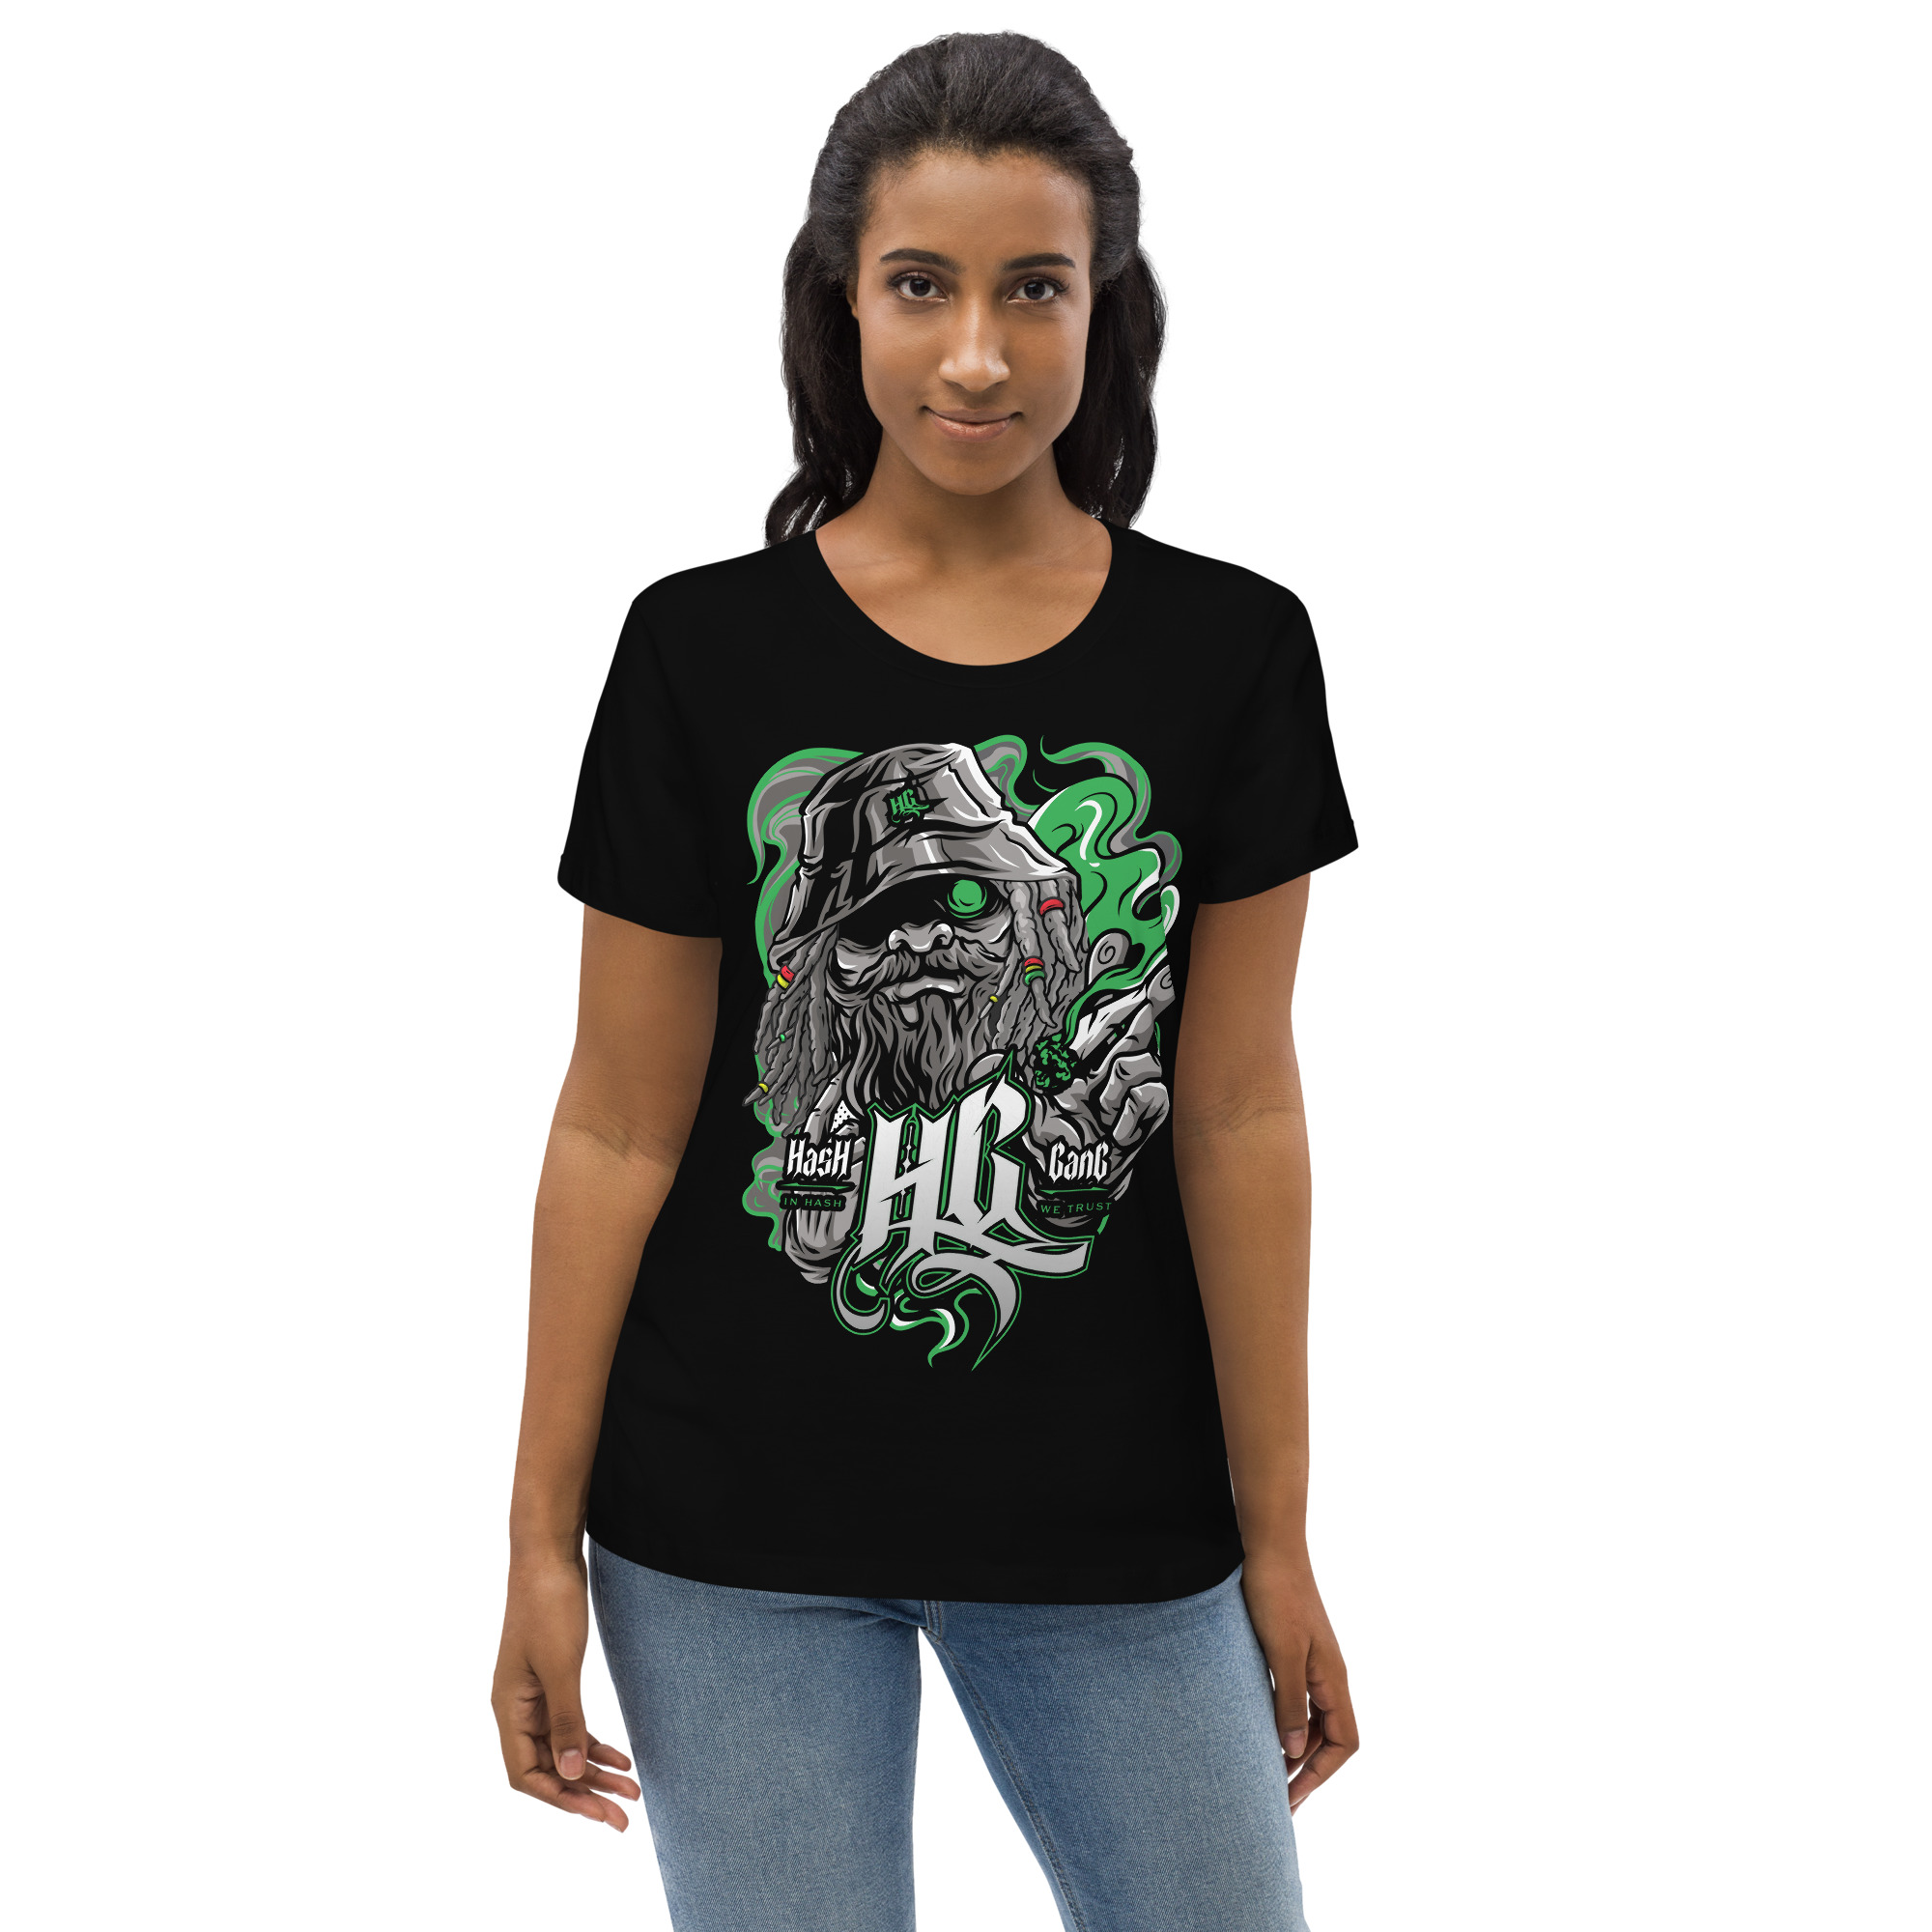 womens-fitted-eco-tee-black-front-2-65a7891b2d146.jpg